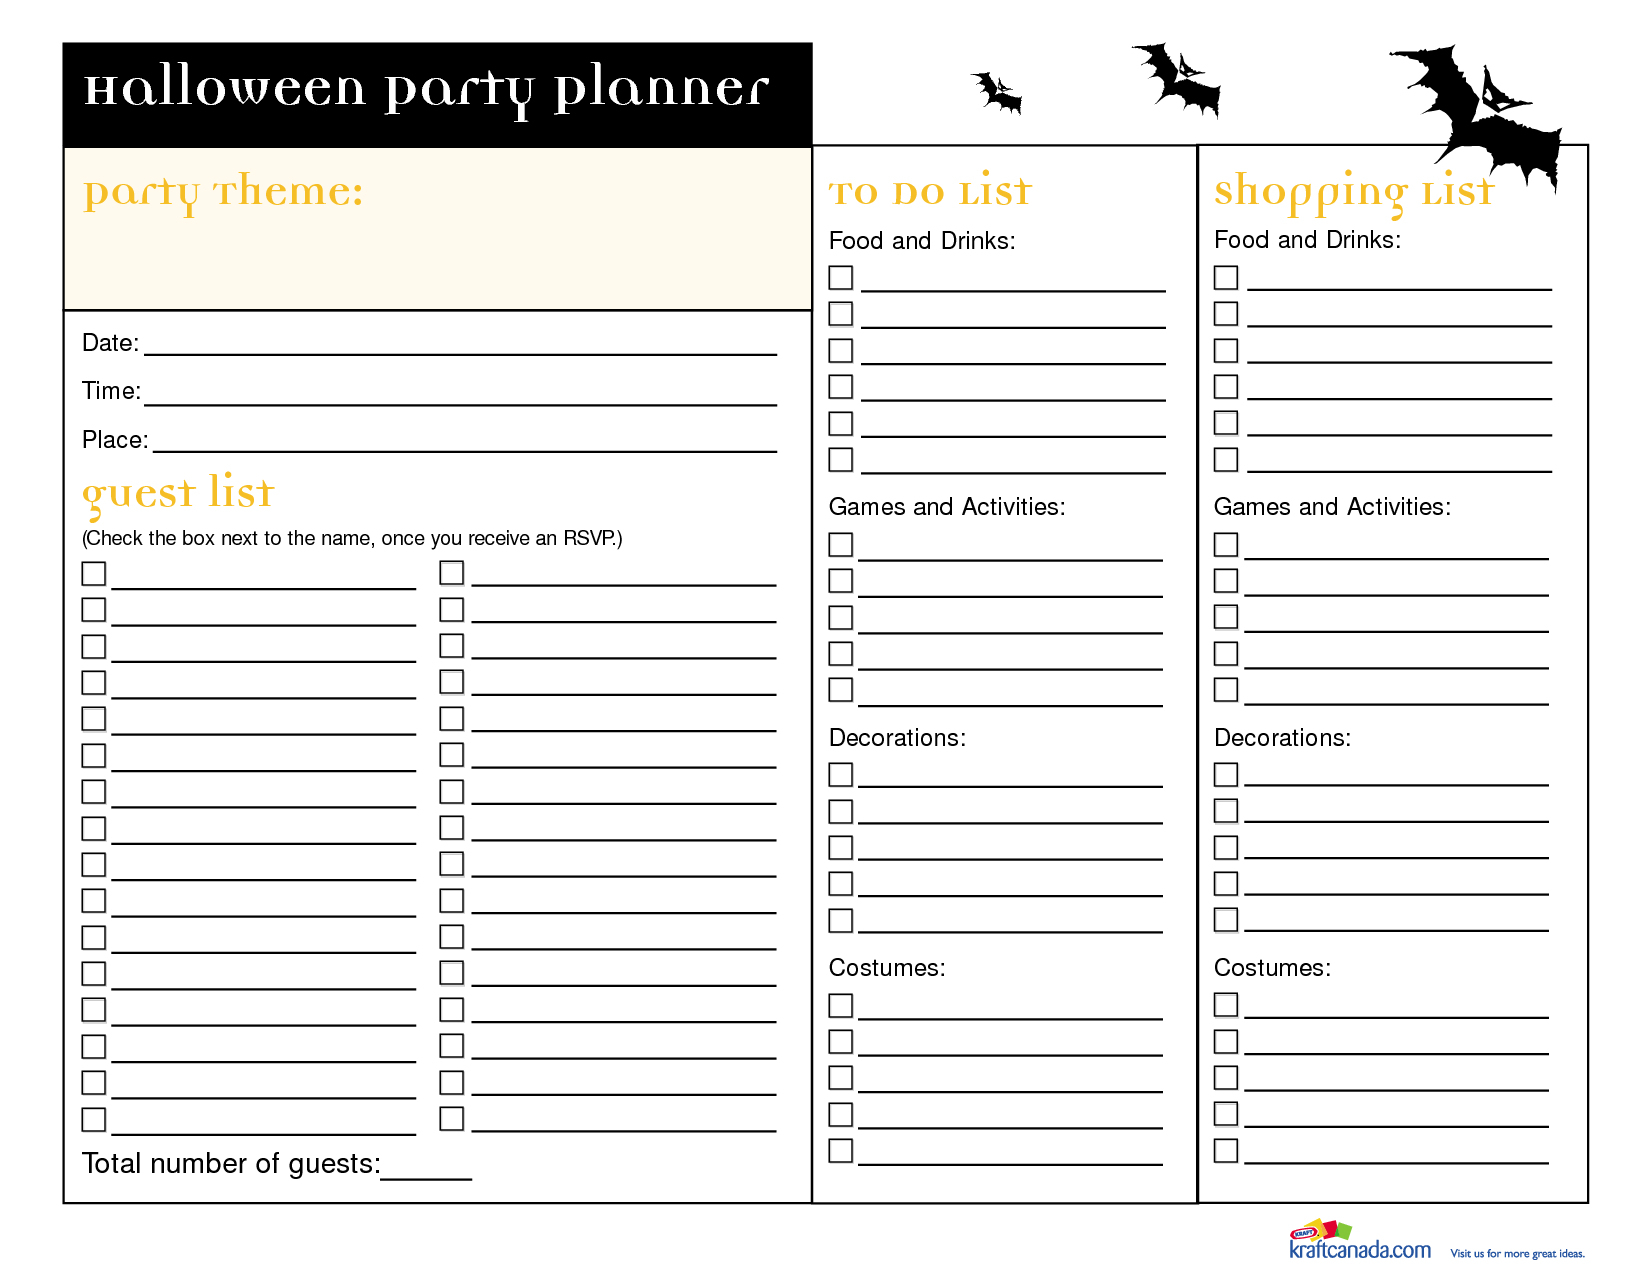 Halloween Party Guest List Templates | Halloween Arts - Free Printable Birthday Guest List